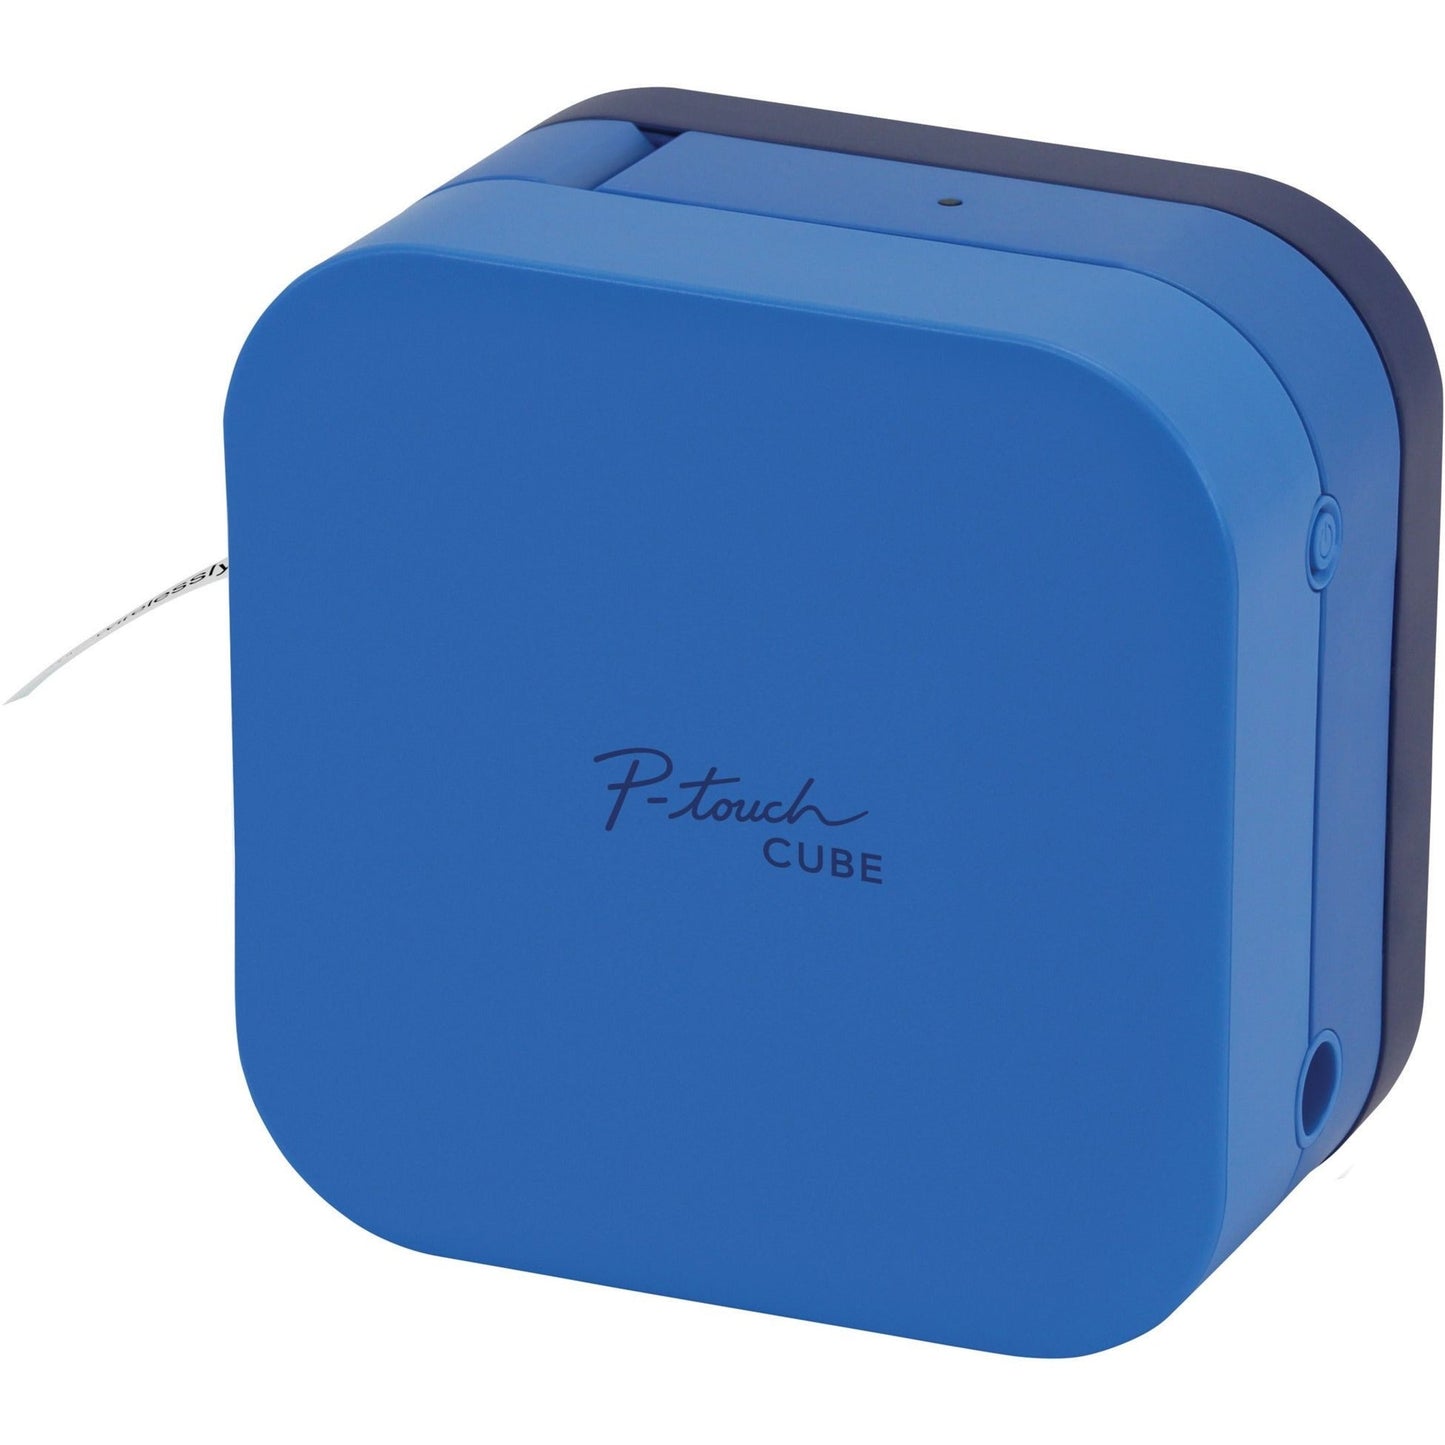 Brother P-touch CUBE Blue